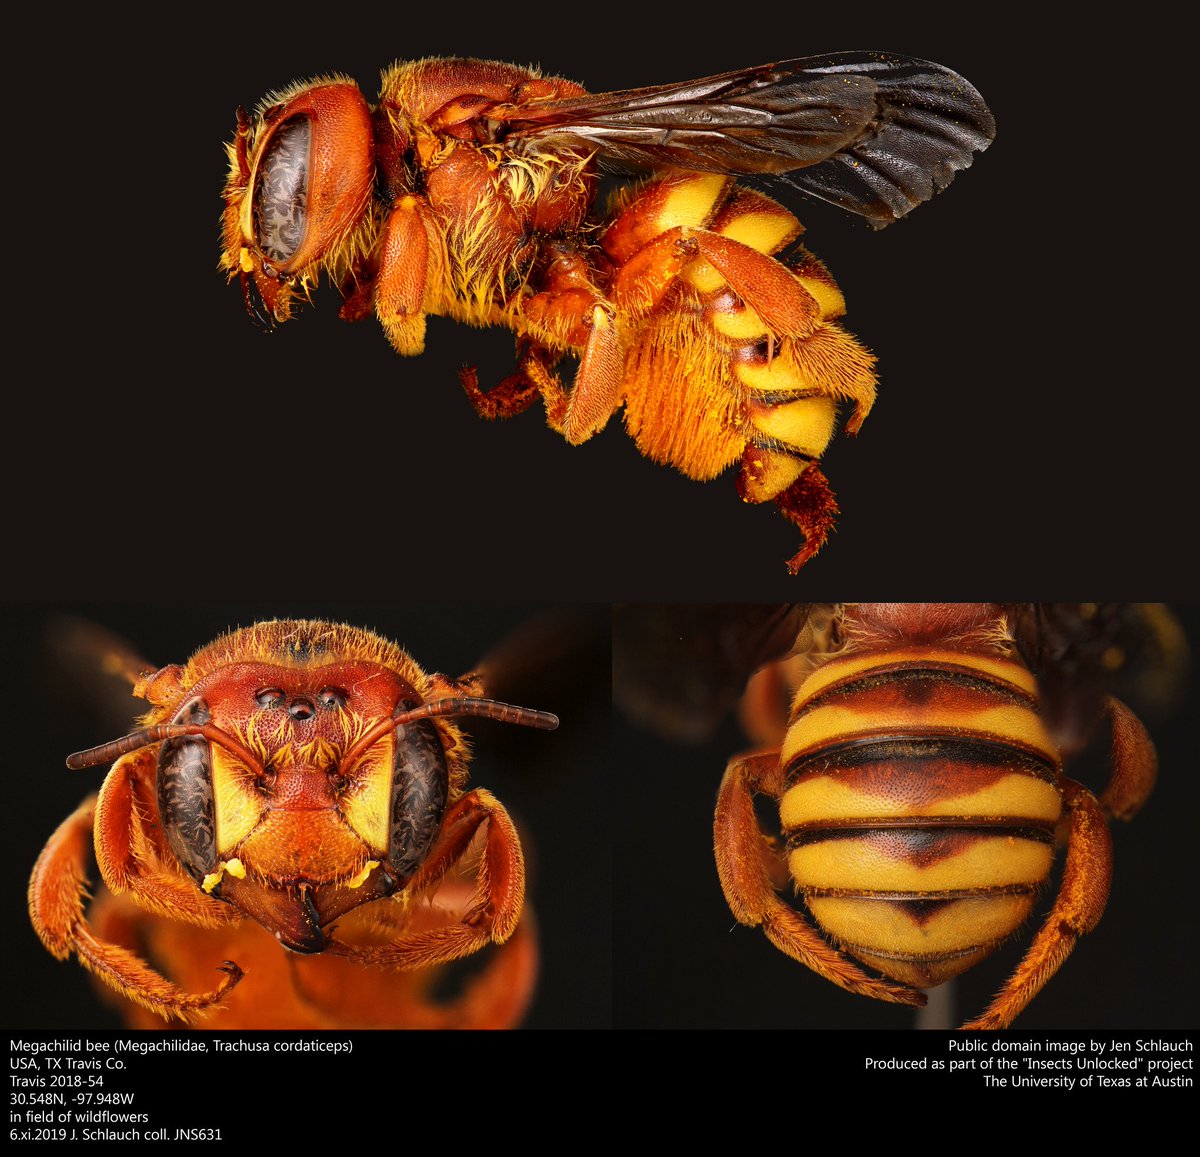 A montage of new public domain images of a leafcutter bee, Trachusa cordaticeps, created by @SchlauchJen.